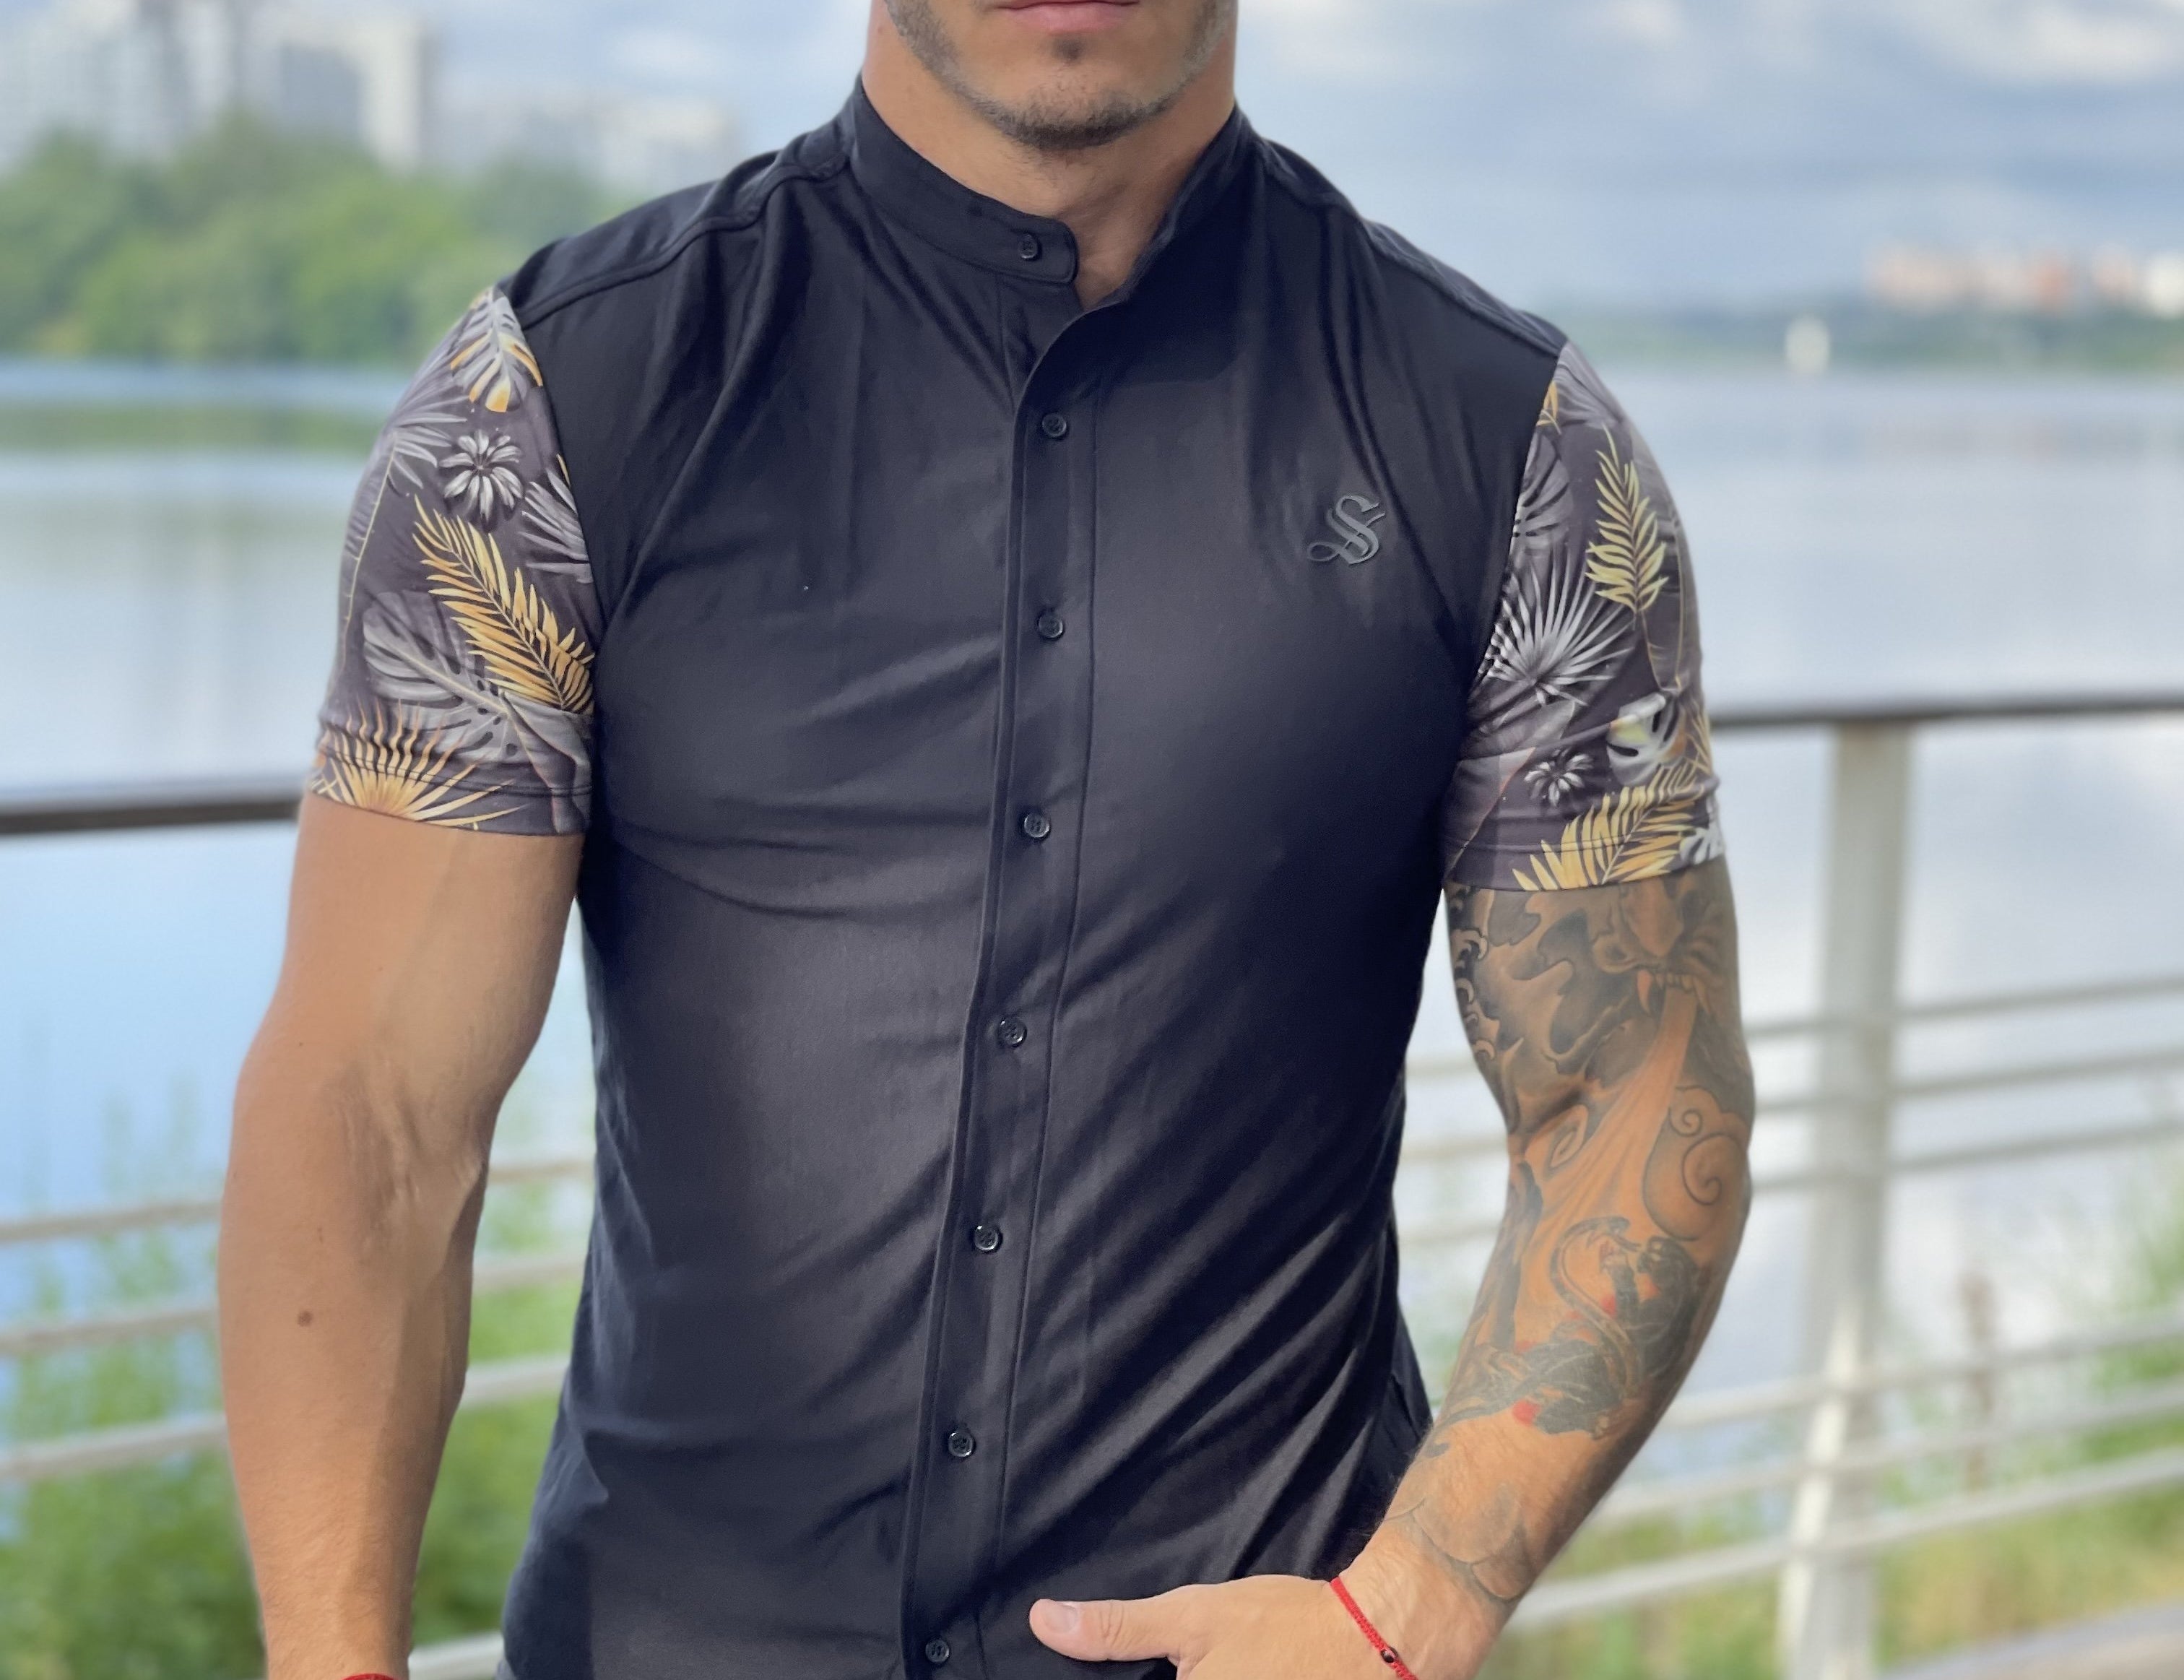 Tropican - Black Shirt for Men (PRE-ORDER DISPATCH DATE 1 JULY 2022) - Sarman Fashion - Wholesale Clothing Fashion Brand for Men from Canada